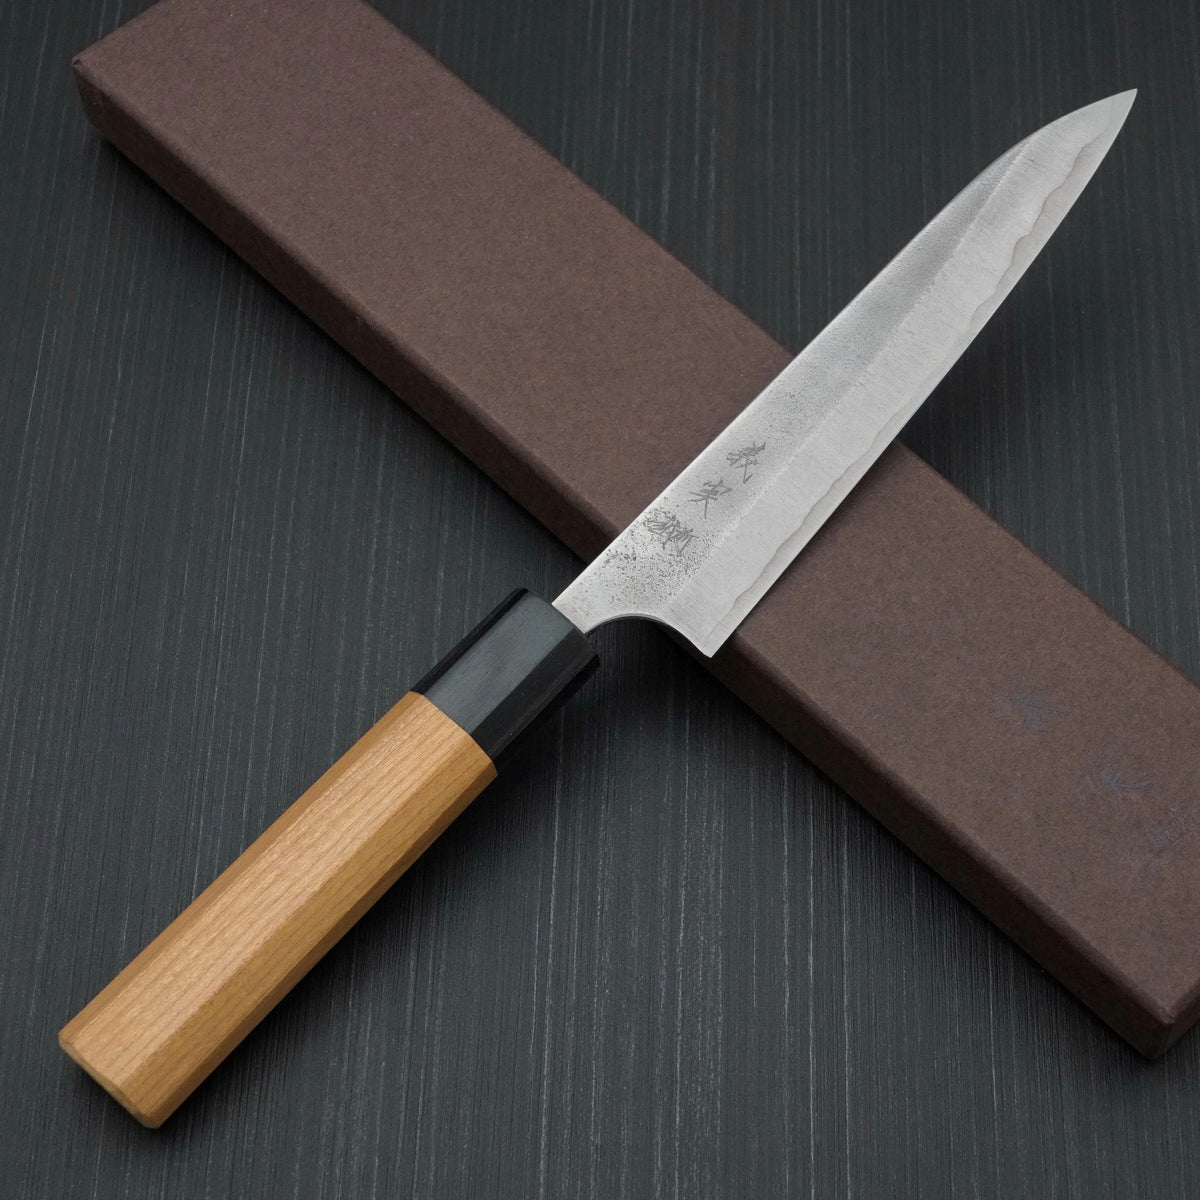 Japanese kitchen knife Yoshimi Kato Petty Aogami Super S/S clad Cherry  D-901 15cm for sale